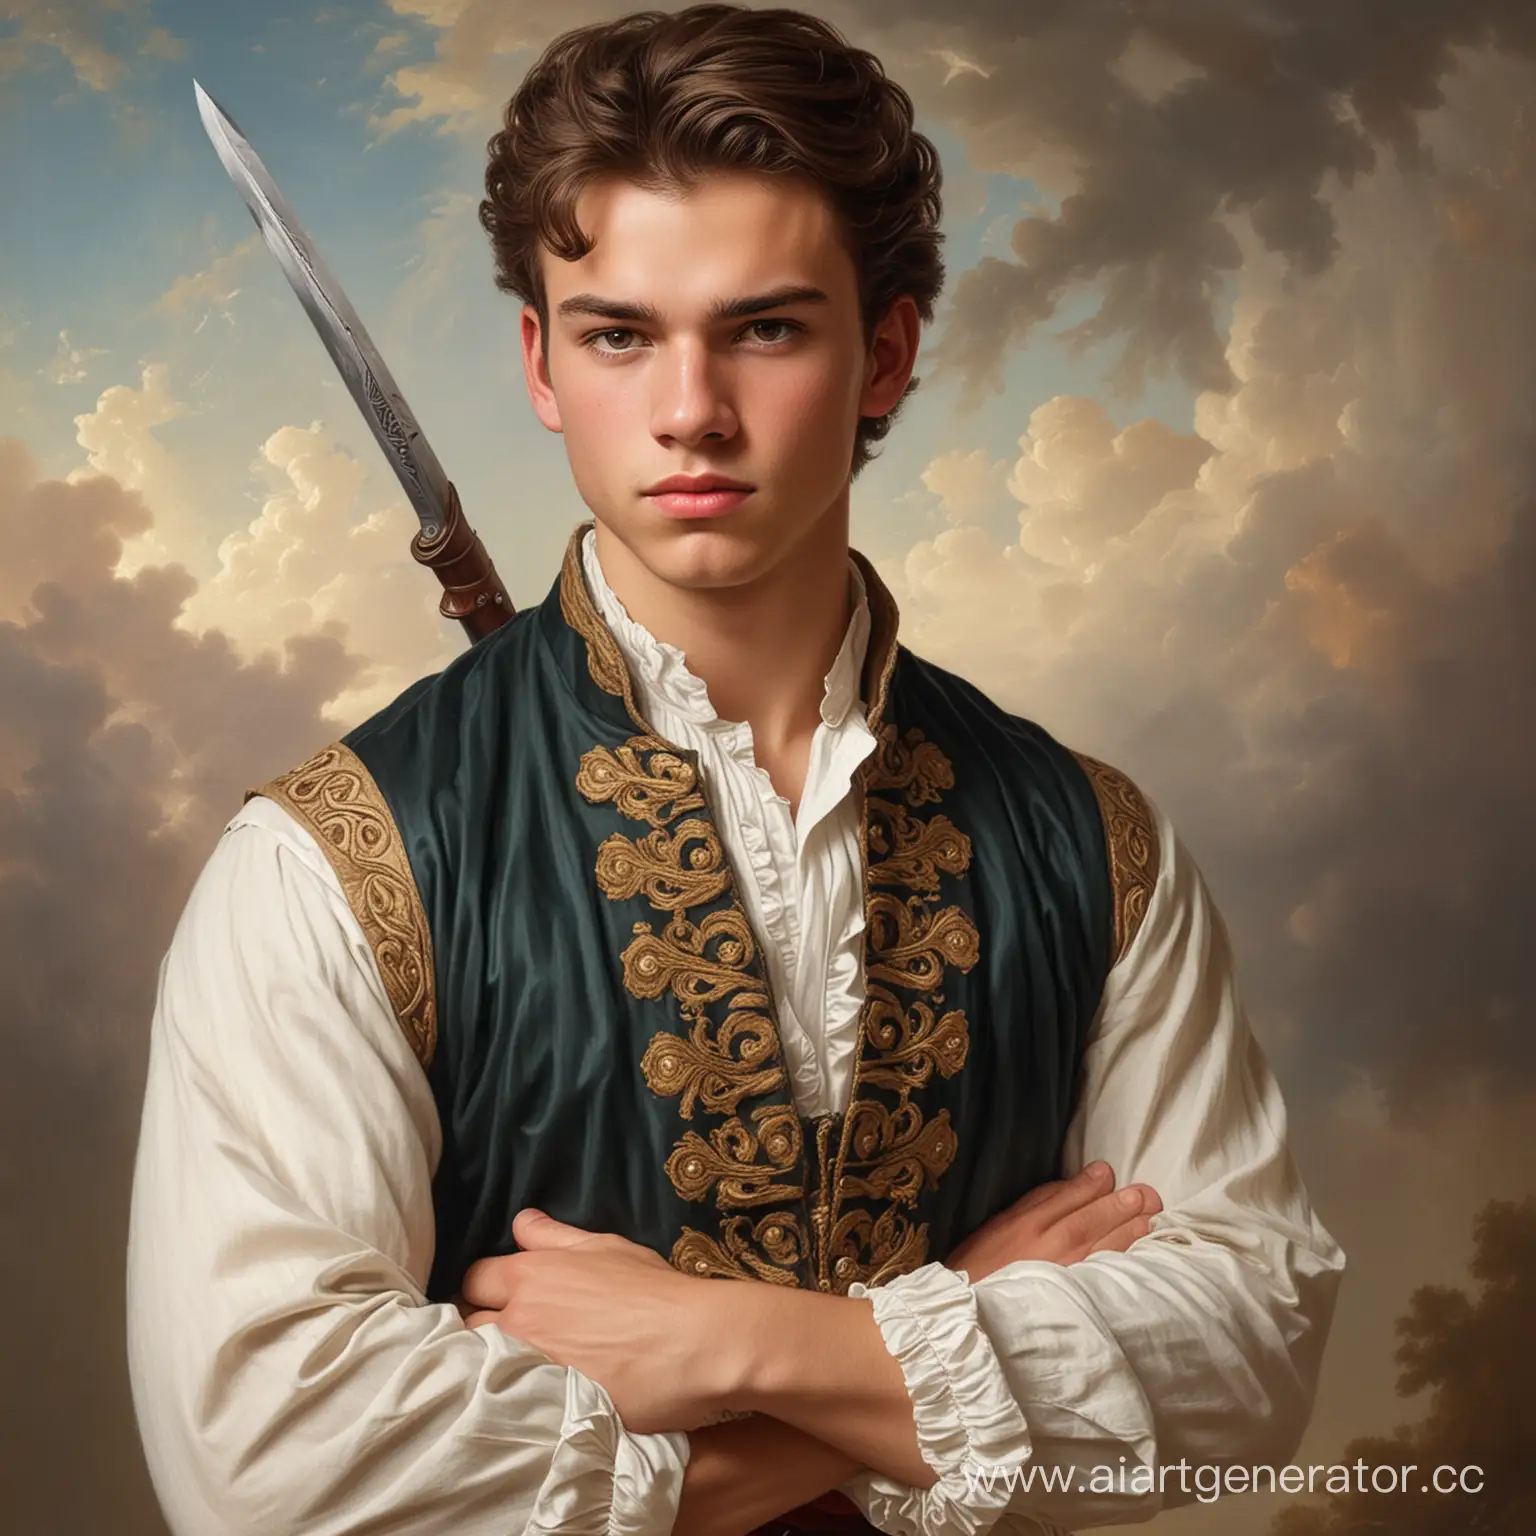 Serious-18th-Century-Warrior-Portrait-with-BrownEyed-Youth-Holding-Weapon